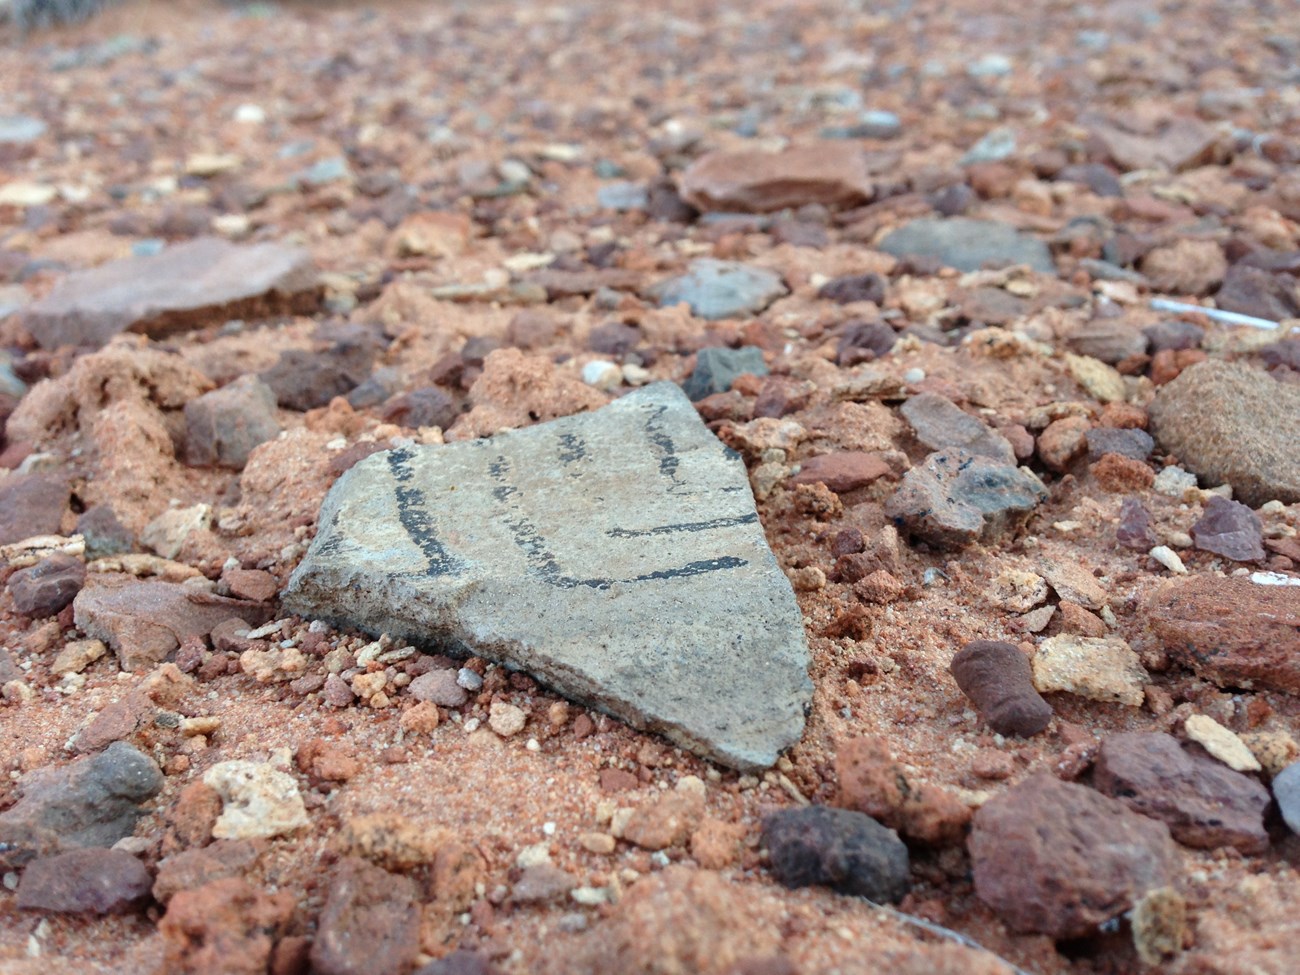 a small piece of pottery with white and black decorations among rocky debris